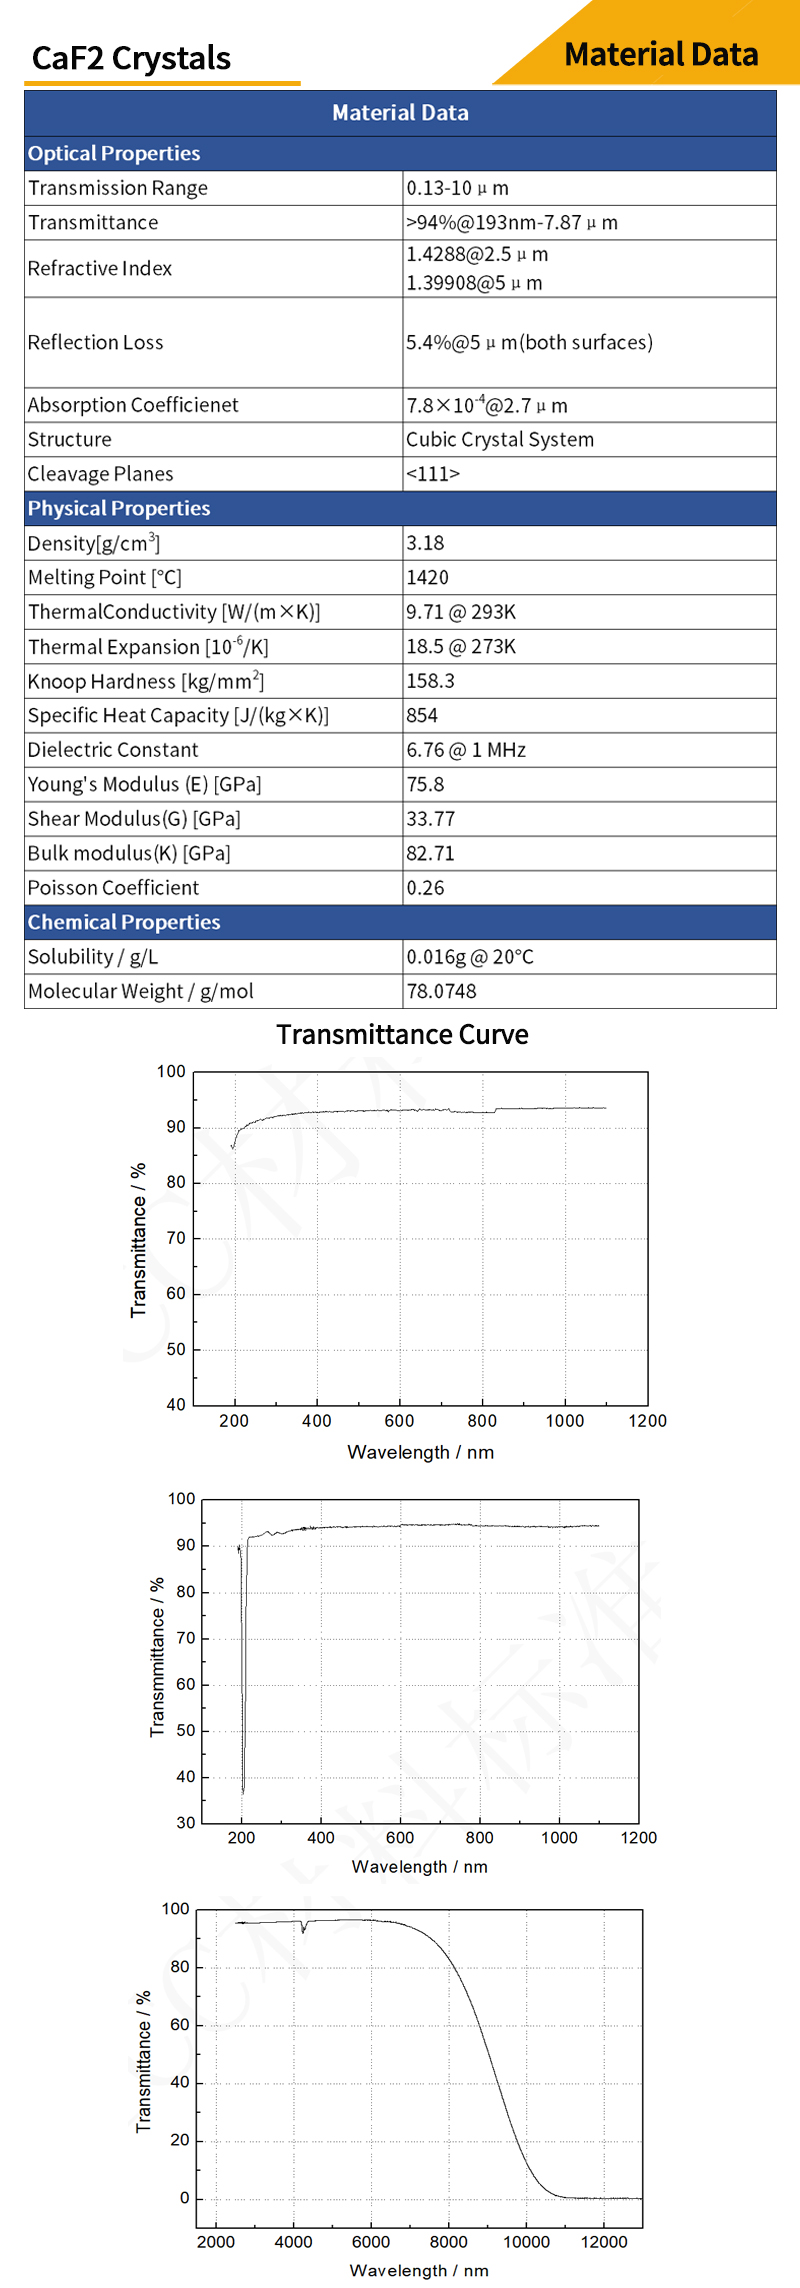 Calcium fluoride round drilled  window material data and transmittance curves